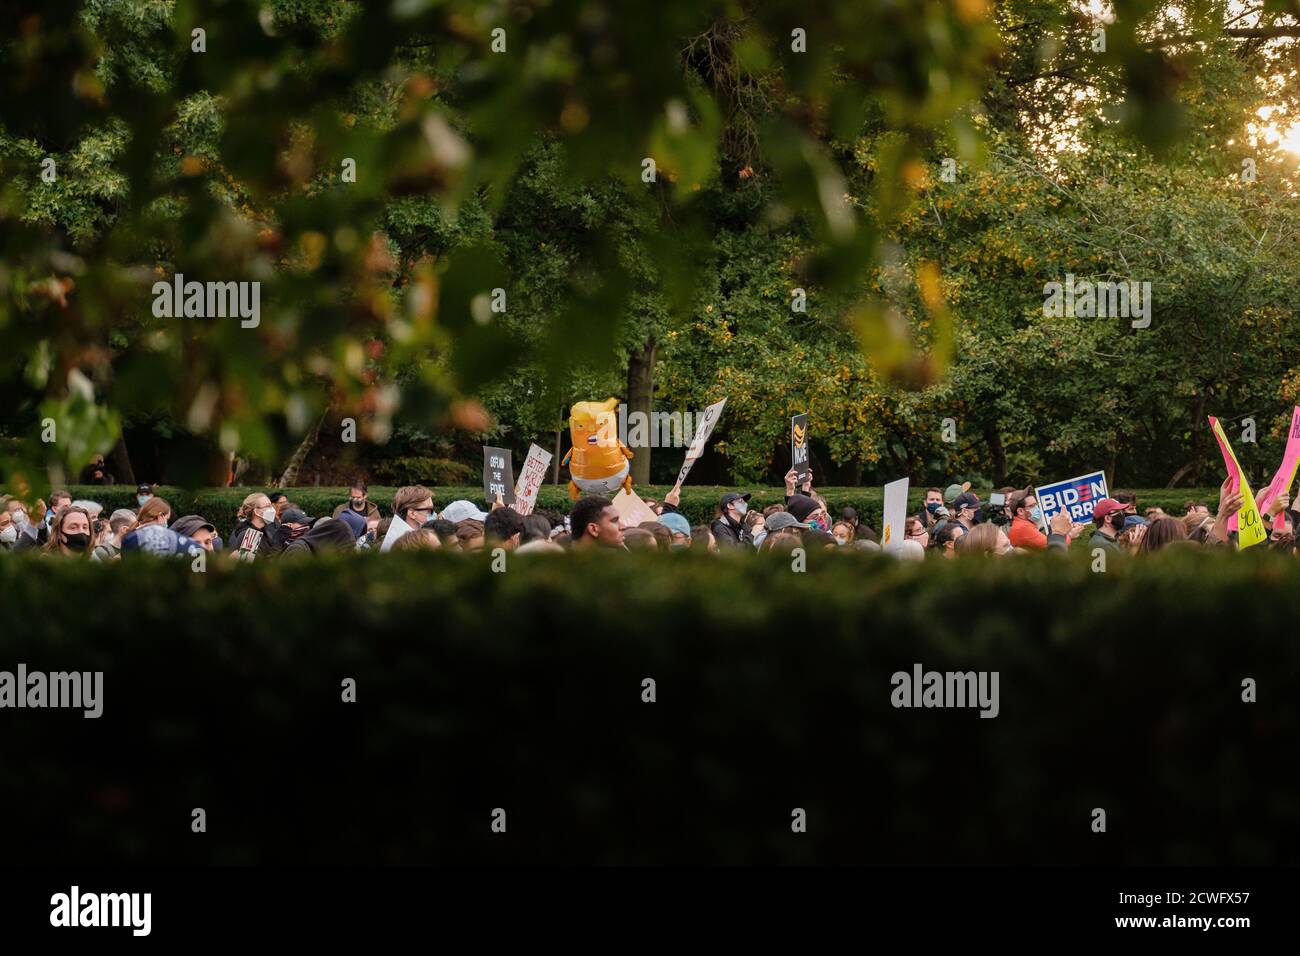 Cleveland, Ohio, USA. 29th Sep, 2020. People are seen protesting on the back lawn off the Cleveland Museum of Art during the first Presidential Debate held in Cleveland, Wednesday, September 30, 2020. Credit: Andrew Dolph/ZUMA Wire/Alamy Live News Stock Photo